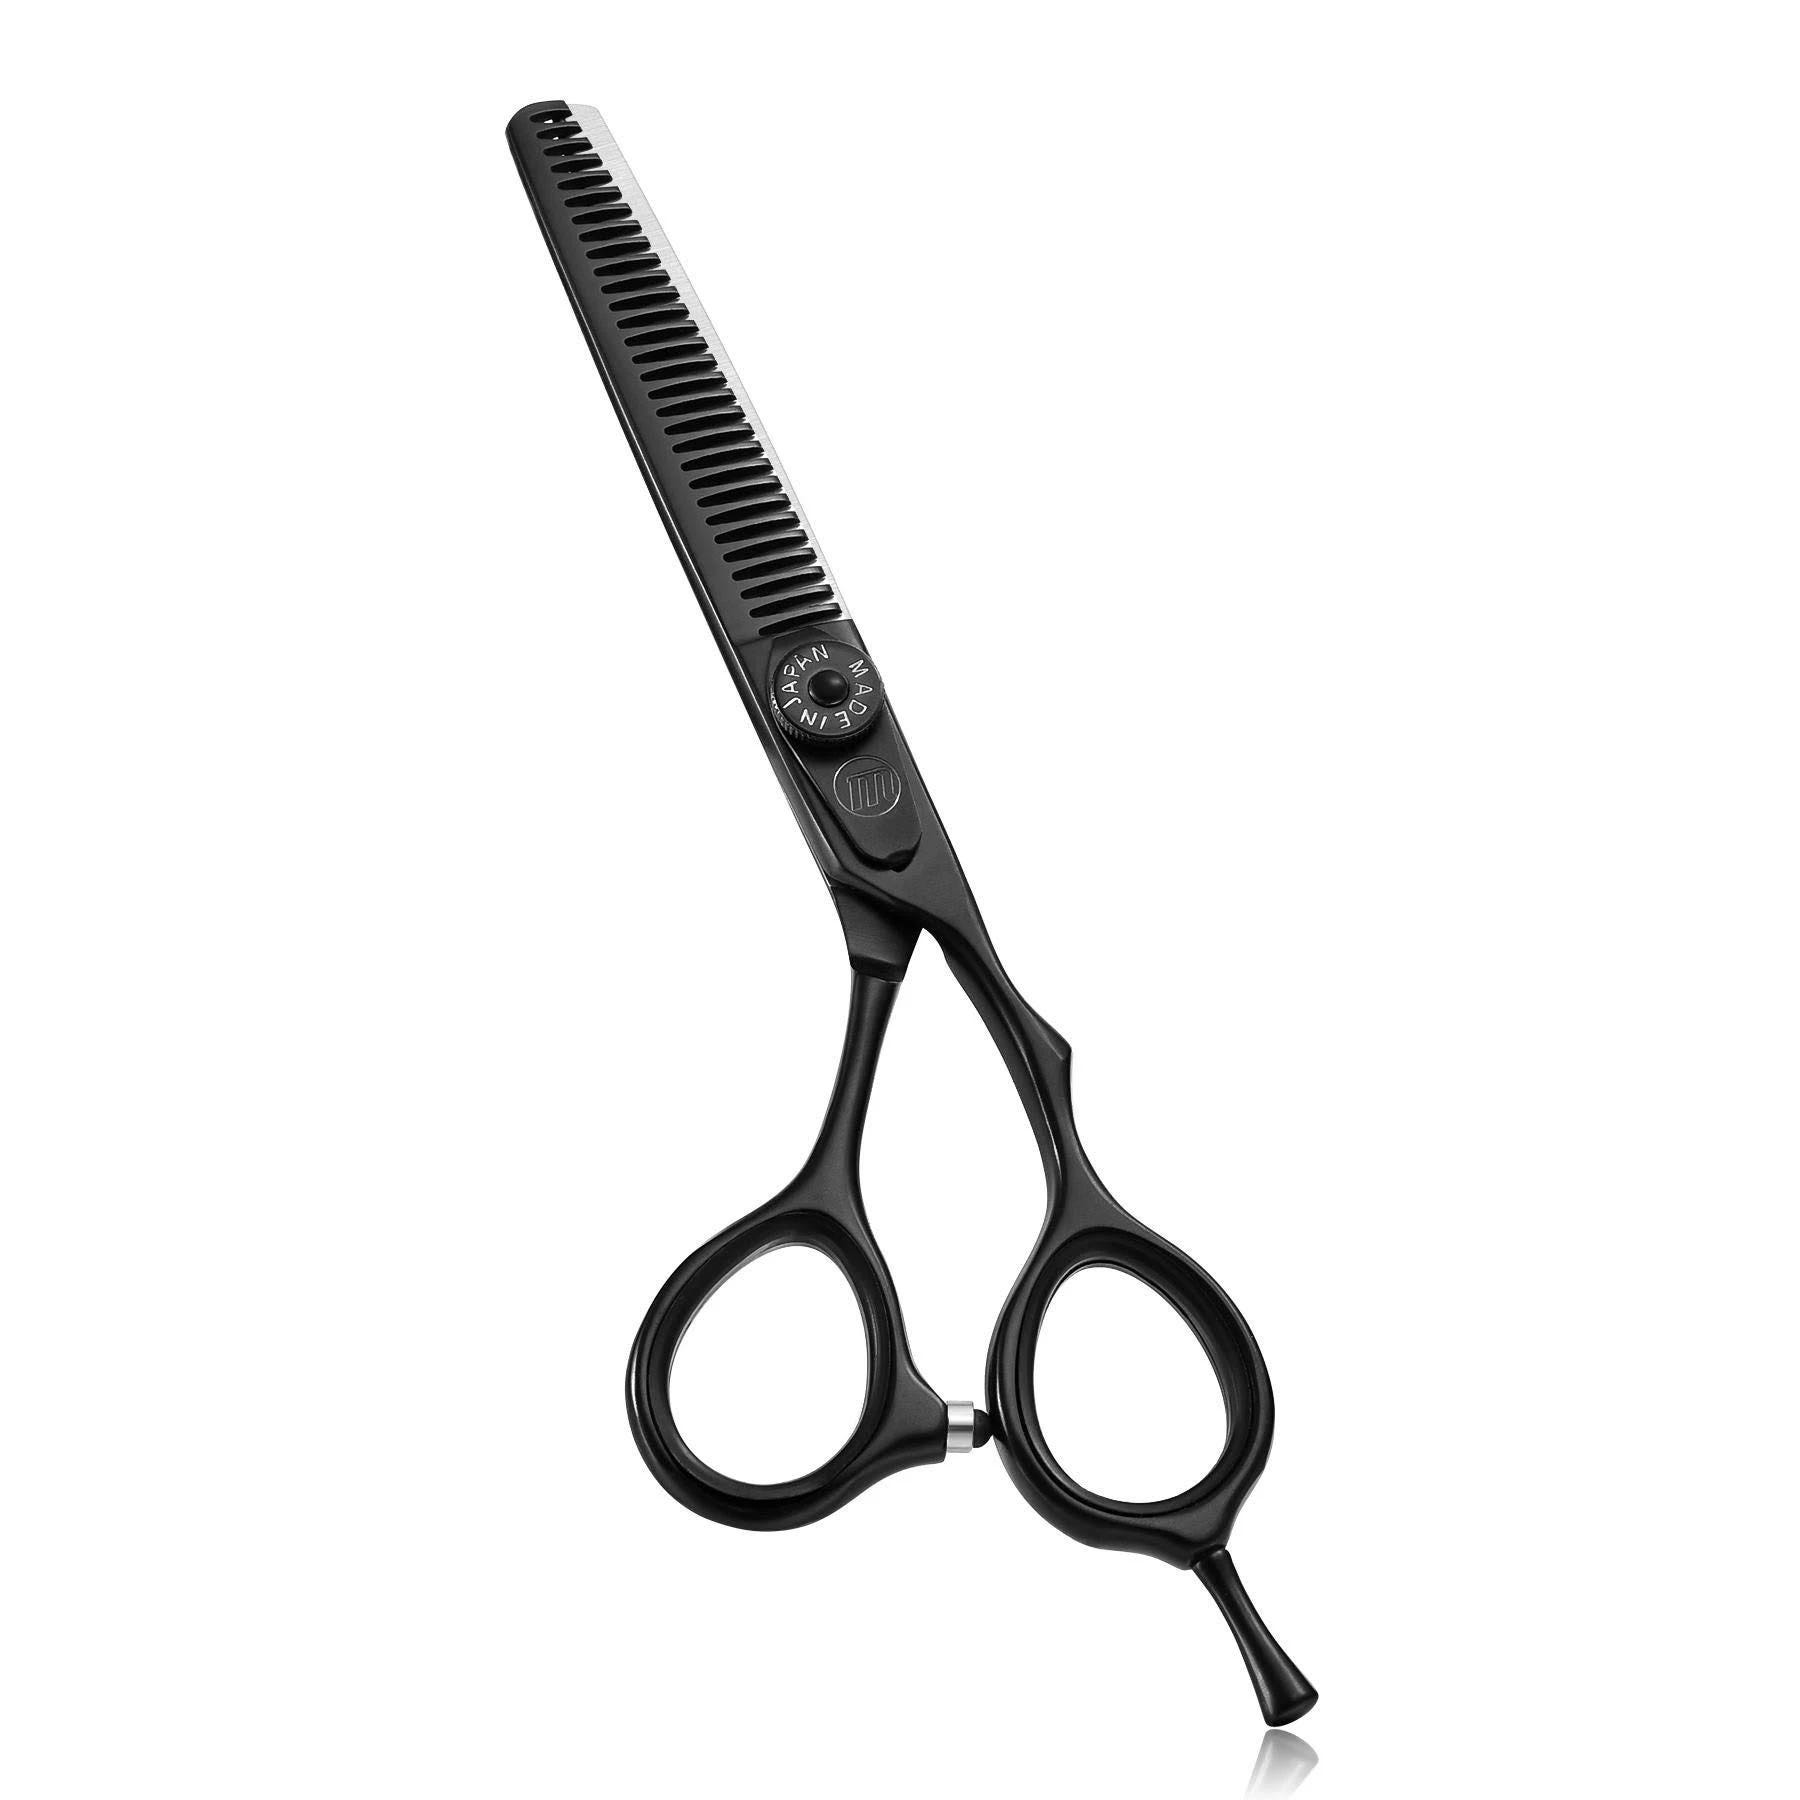 Moontay Professional Barber Hairdressing Thinning Shears | Image